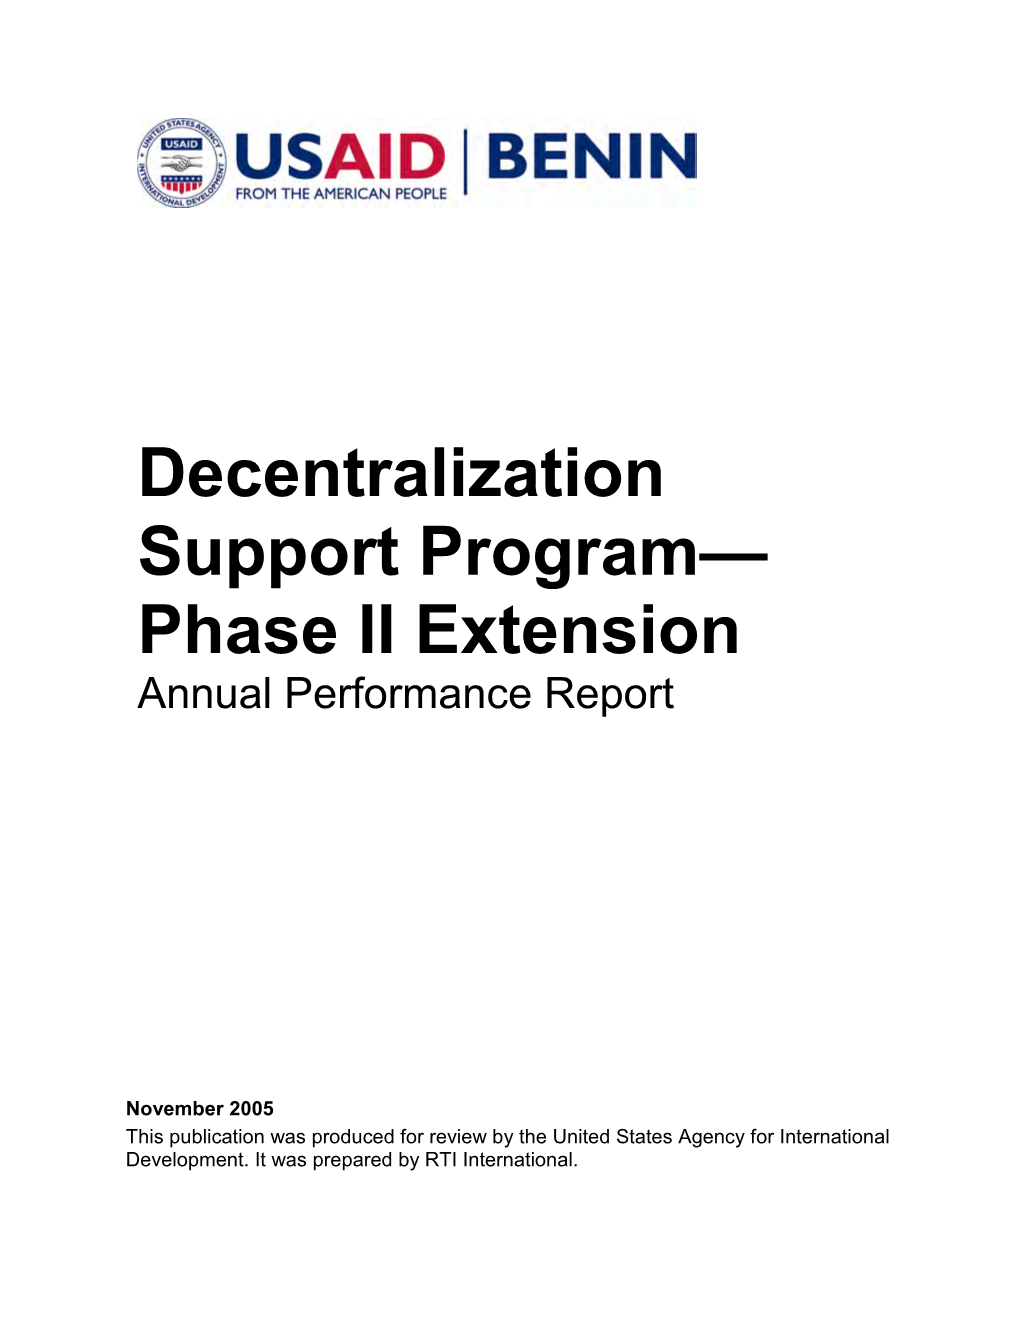 Decentralization Support Program— Phase II Extension Annual Performance Report